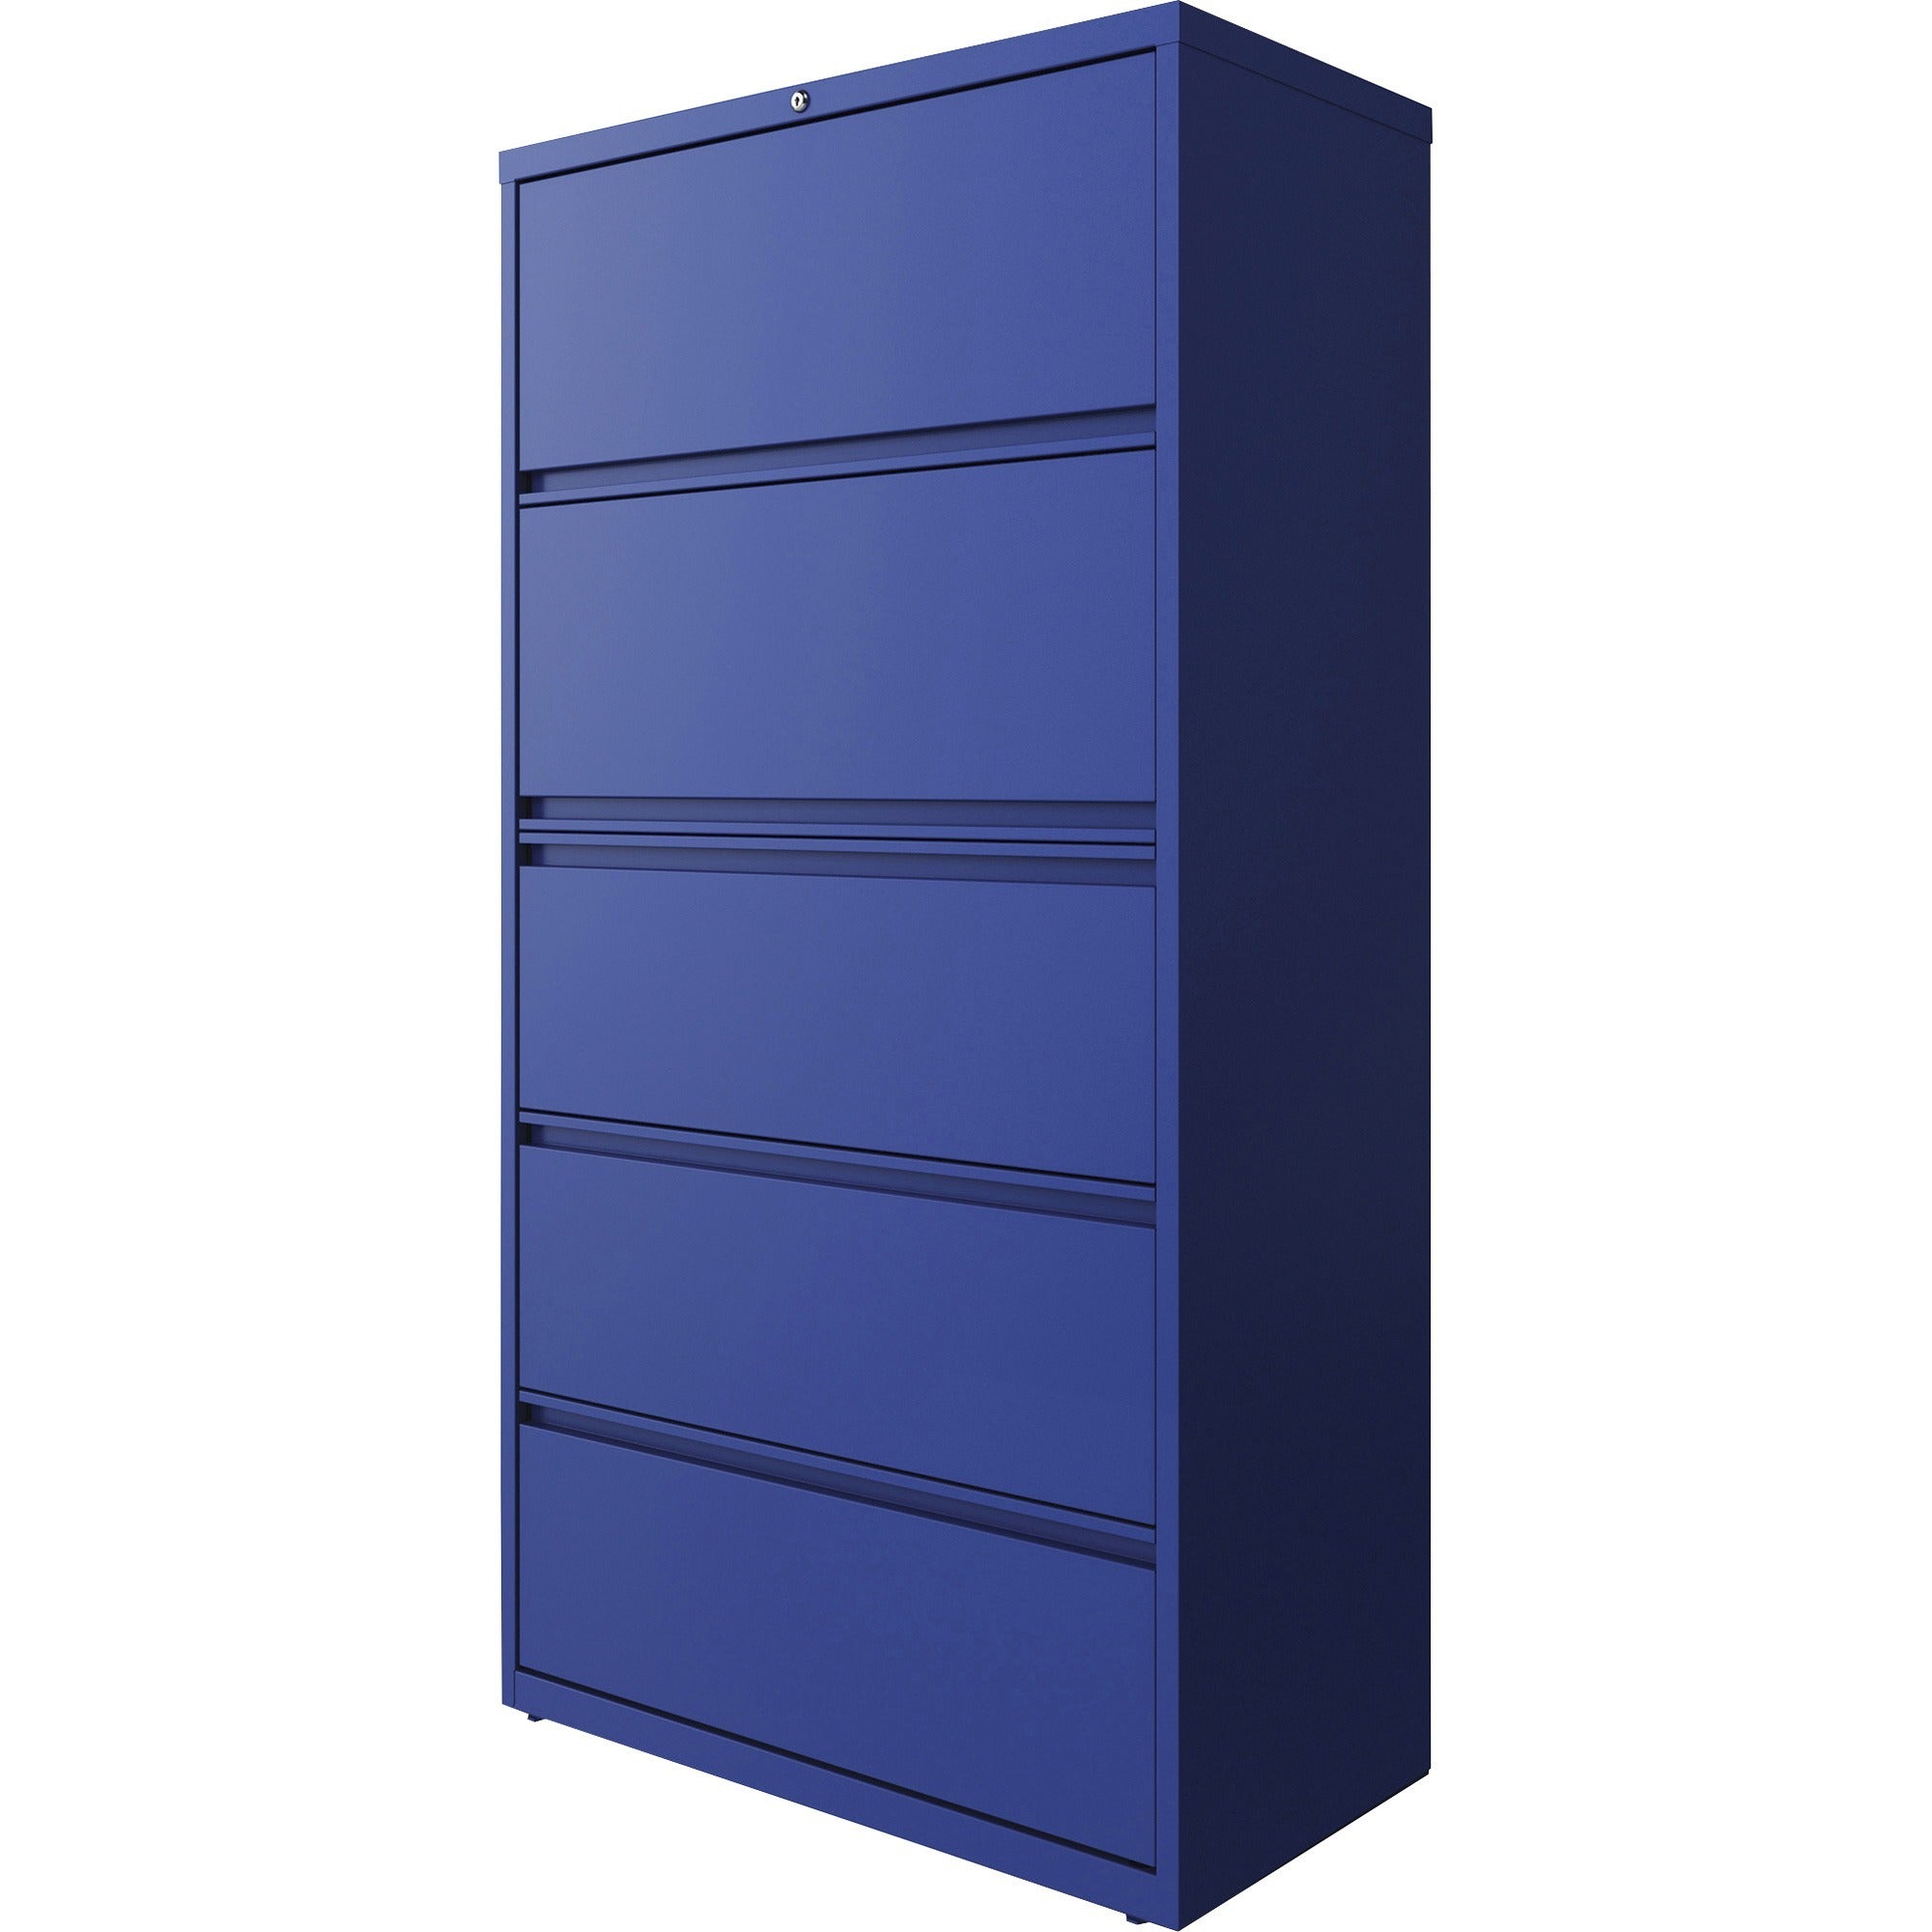 lorell-fortress-series-lateral-file-w-roll-out-posting-shelf-36-x-188-x-678-5-x-drawers-for-file-letter-legal-a4-lateral-hanging-rail-label-holder-durable-nonporous-surface-removable-lock-locking-bar-pull-out-drawer-ball-bea_llr03122 - 3